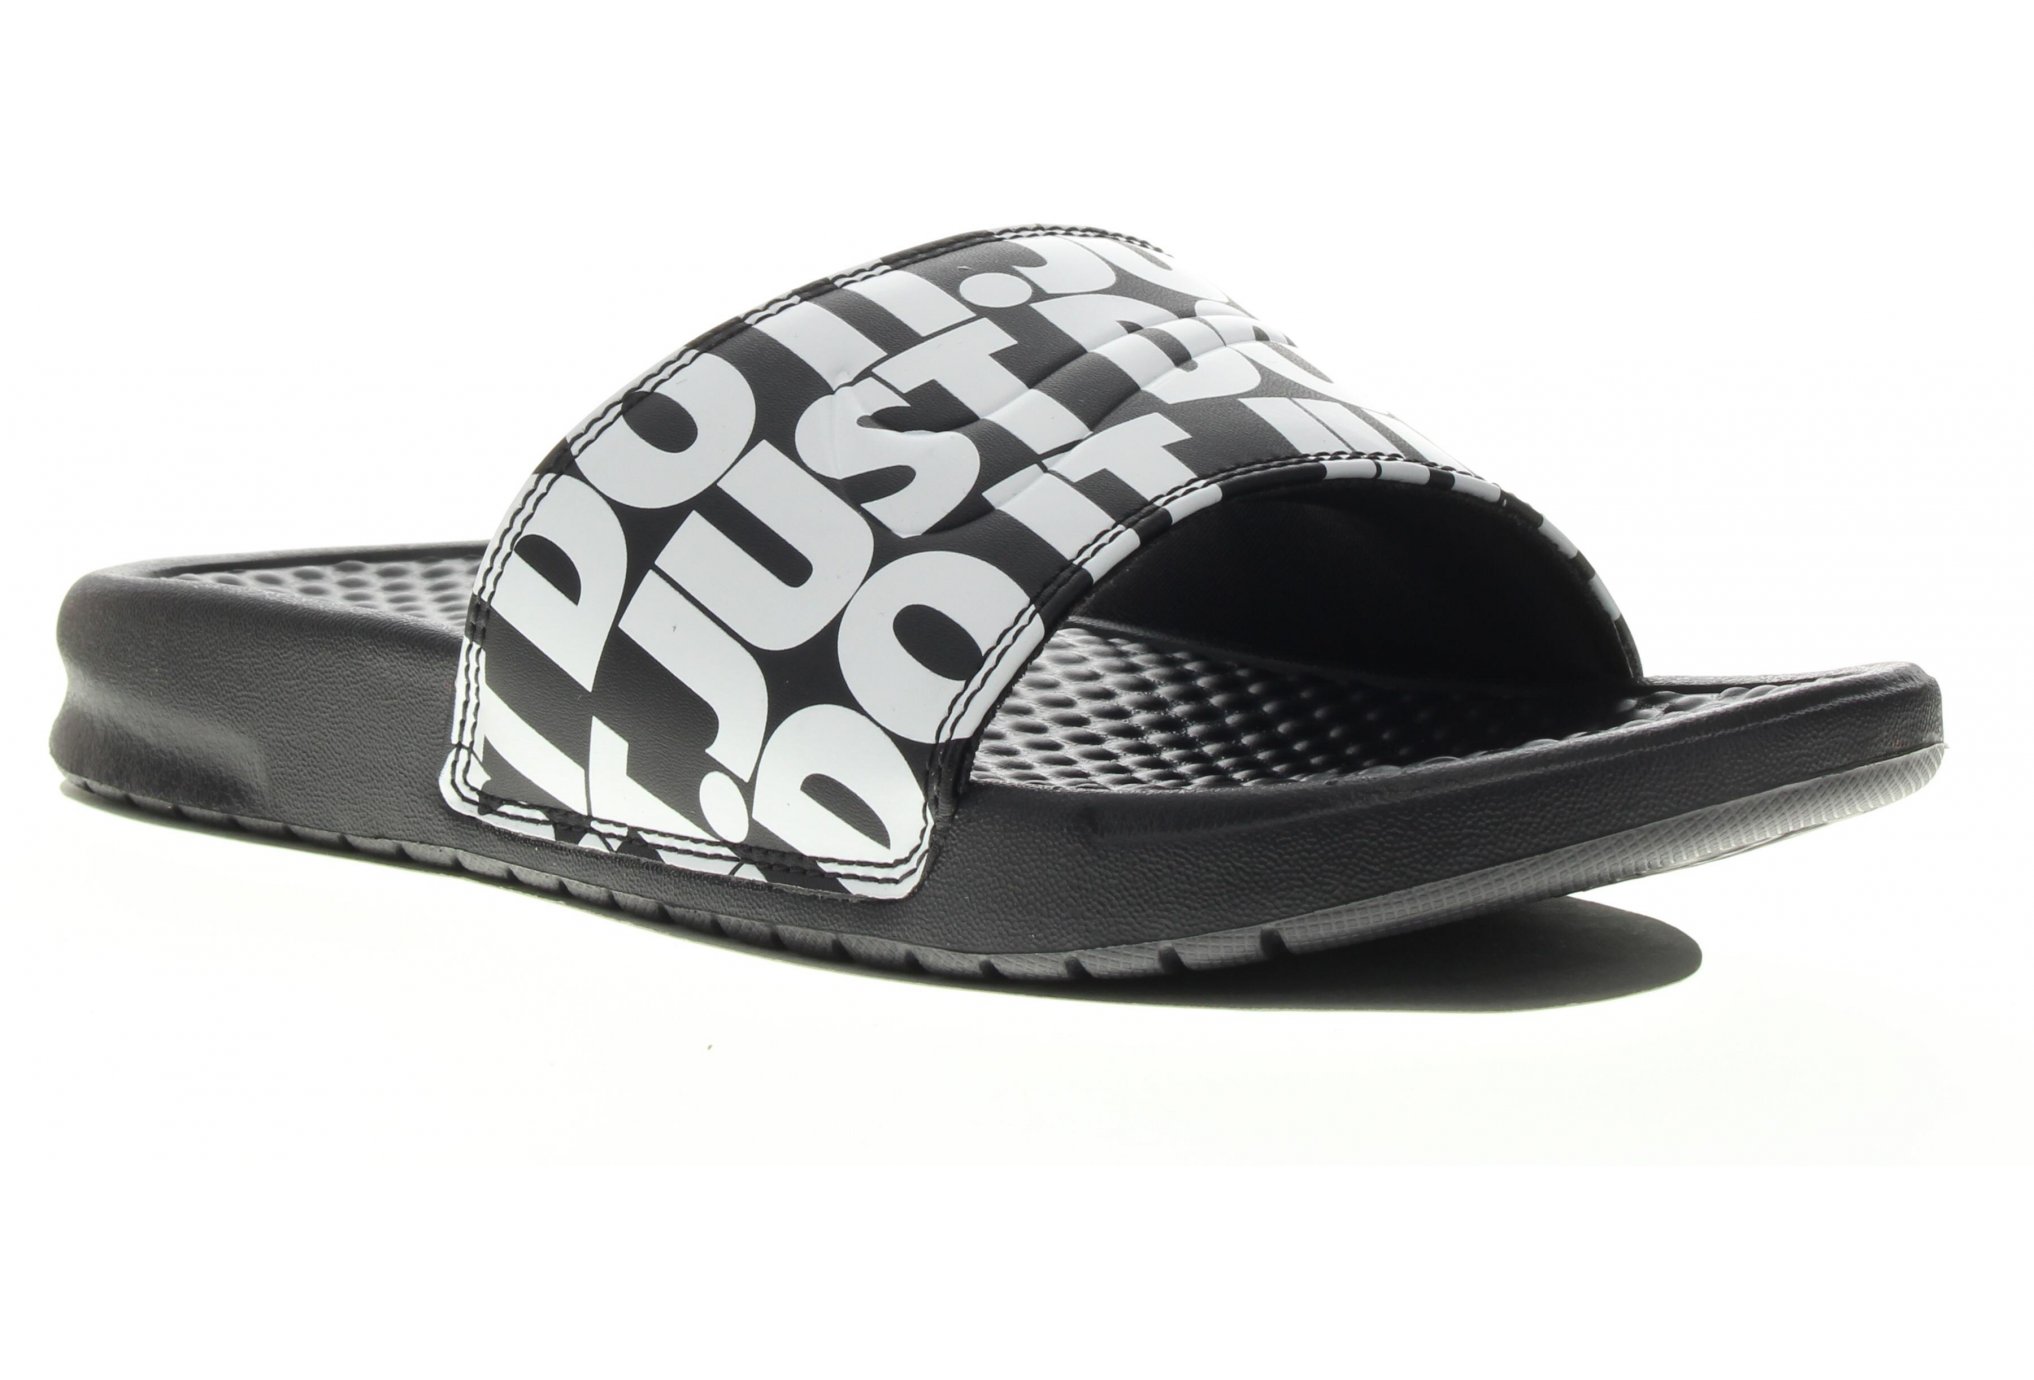 Nike Benassi jdi print m dittique chaussures homme